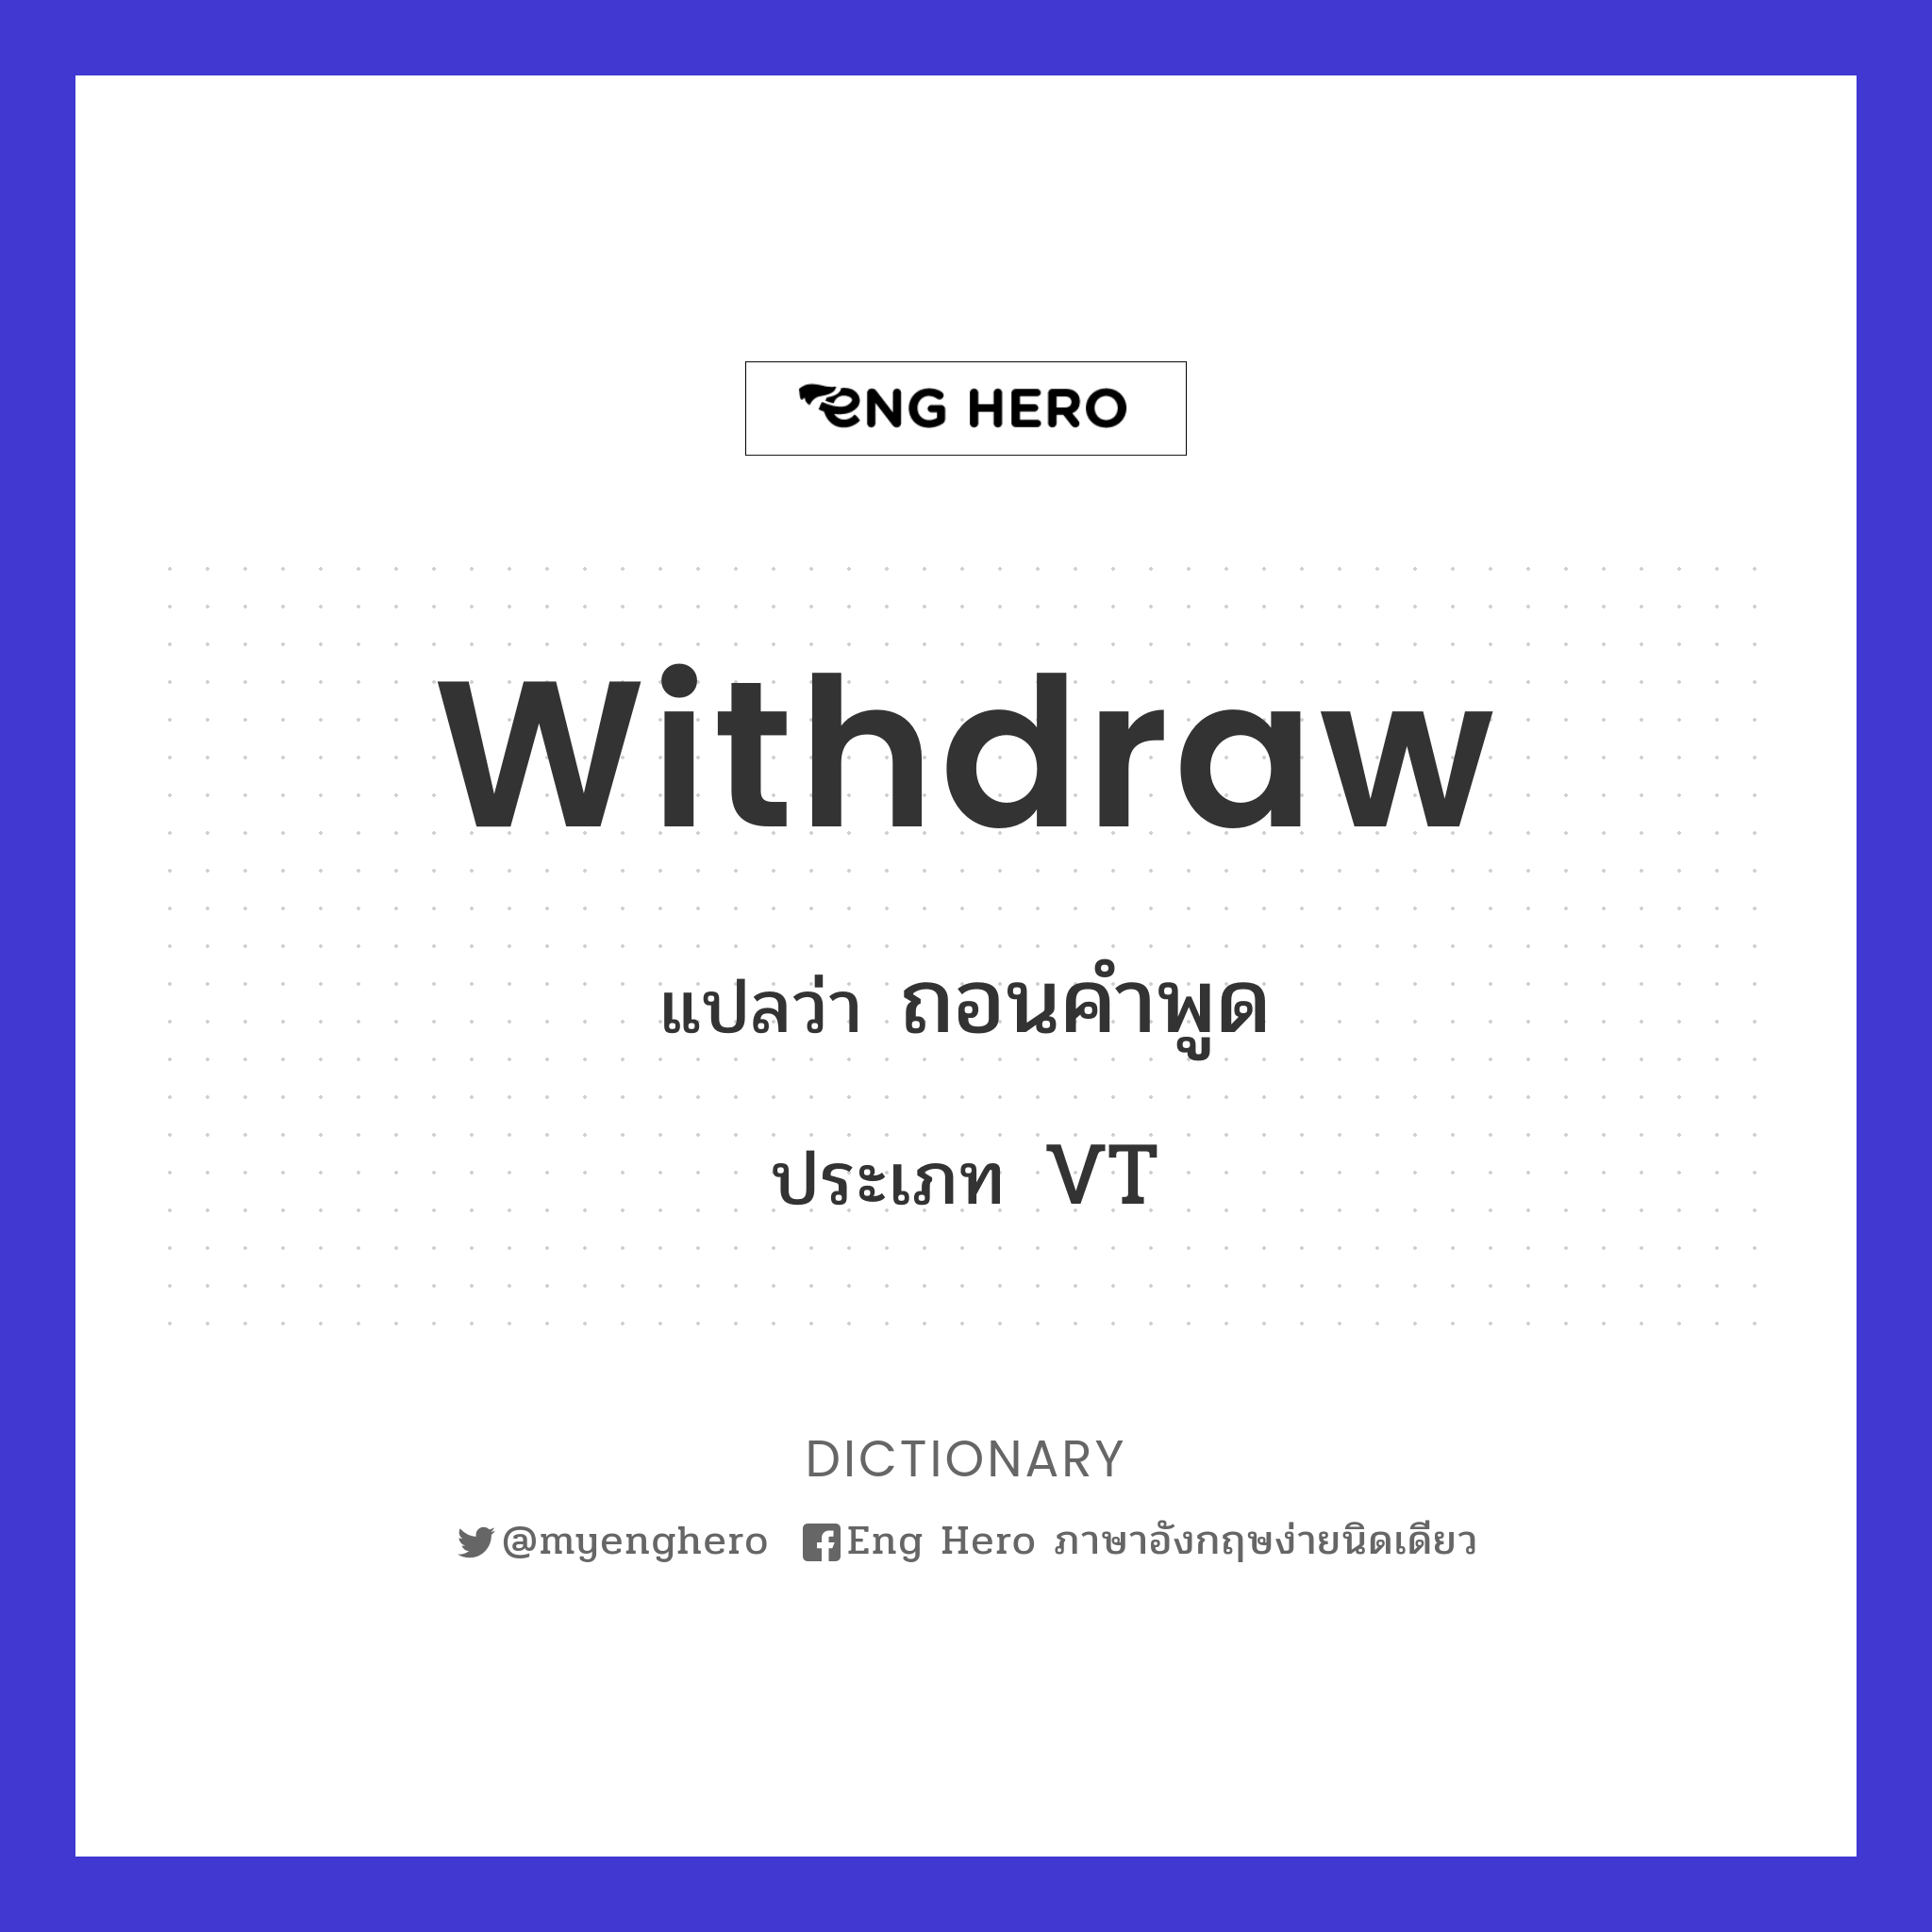 withdraw